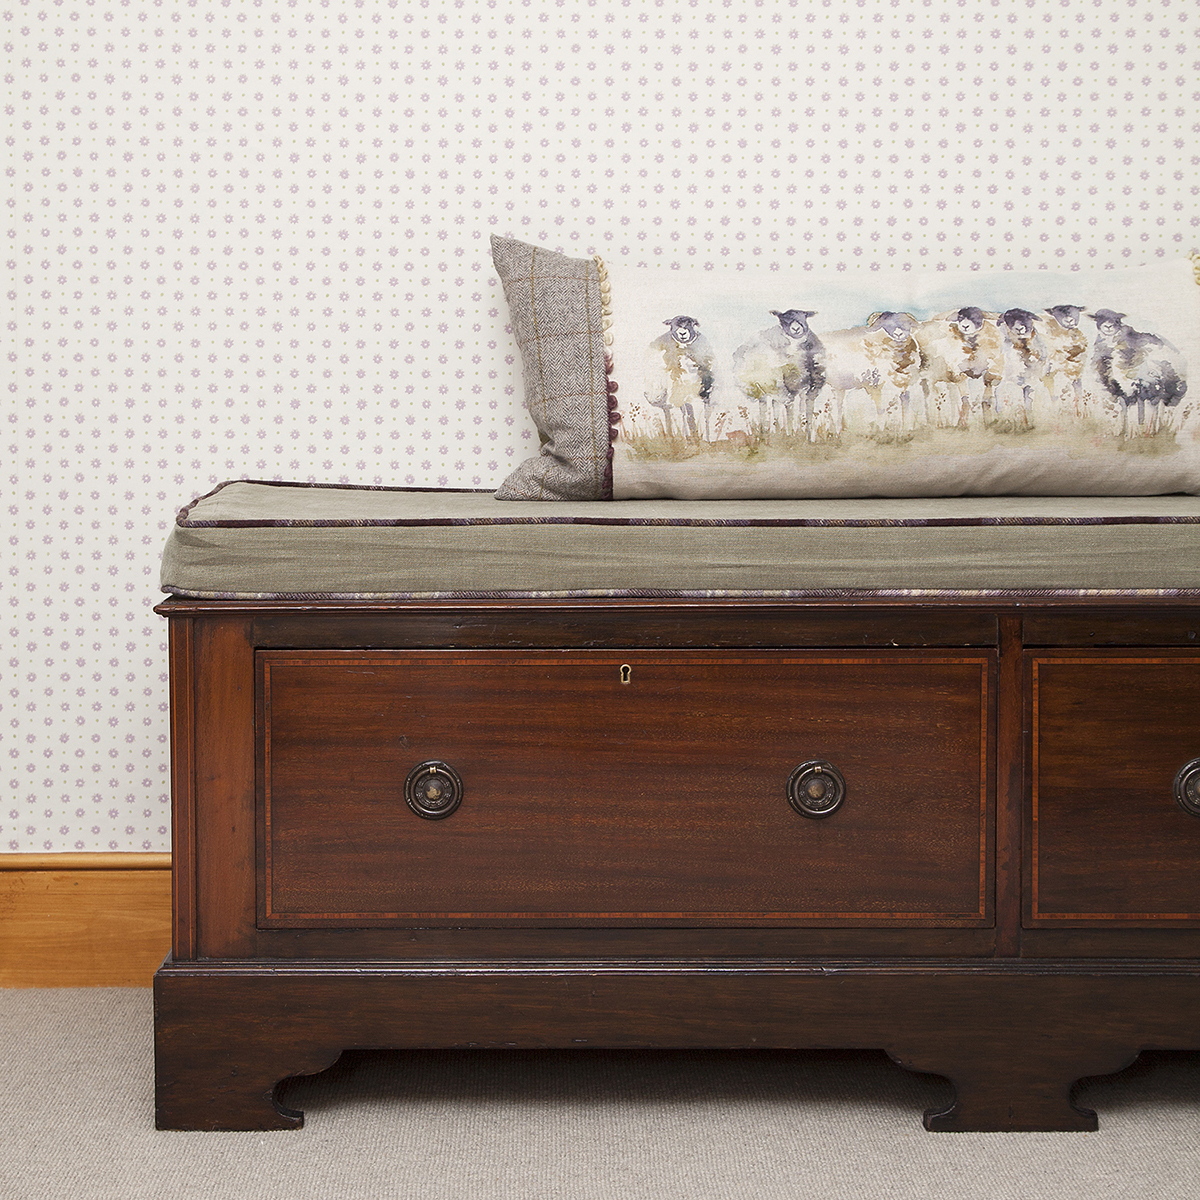 An old low chest with the addition of a soft moss green linen seat cushion with contrast piping.